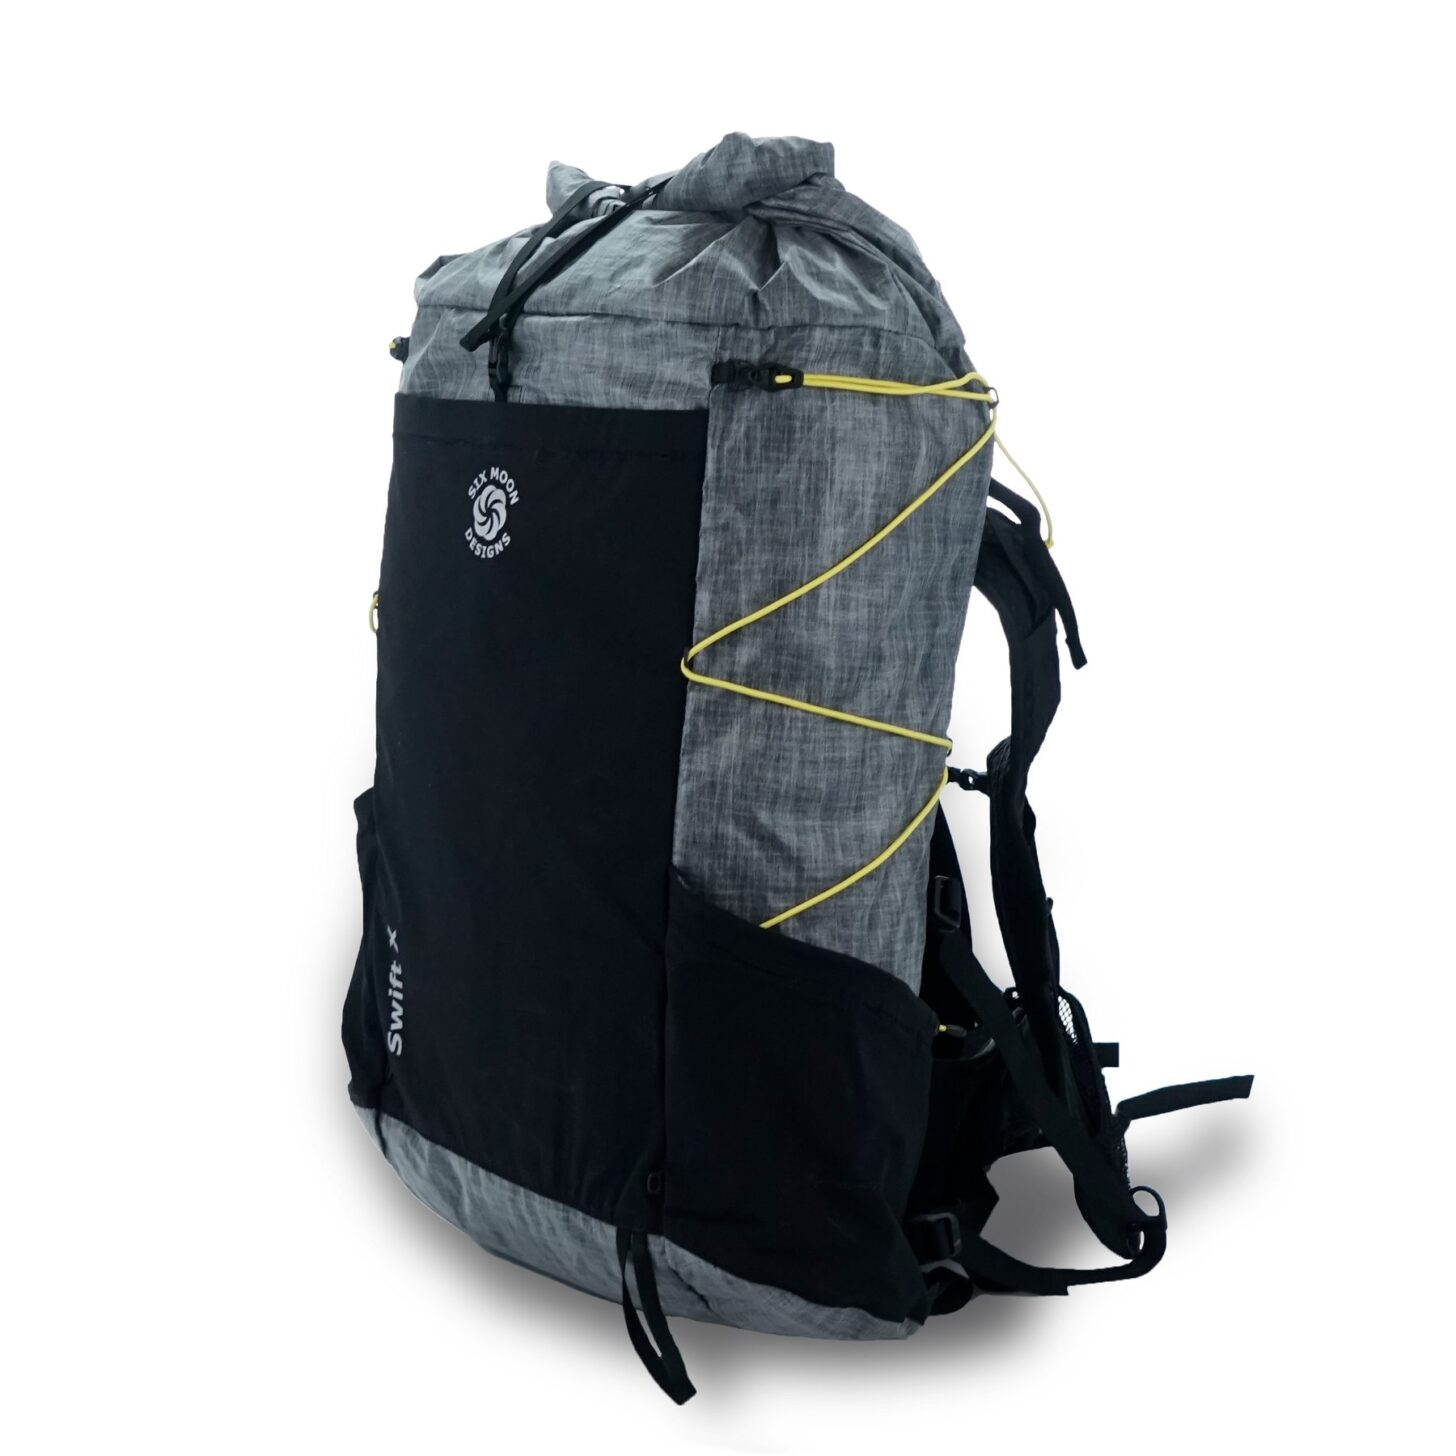 The Six Moon Designs hiking backpack against a white background